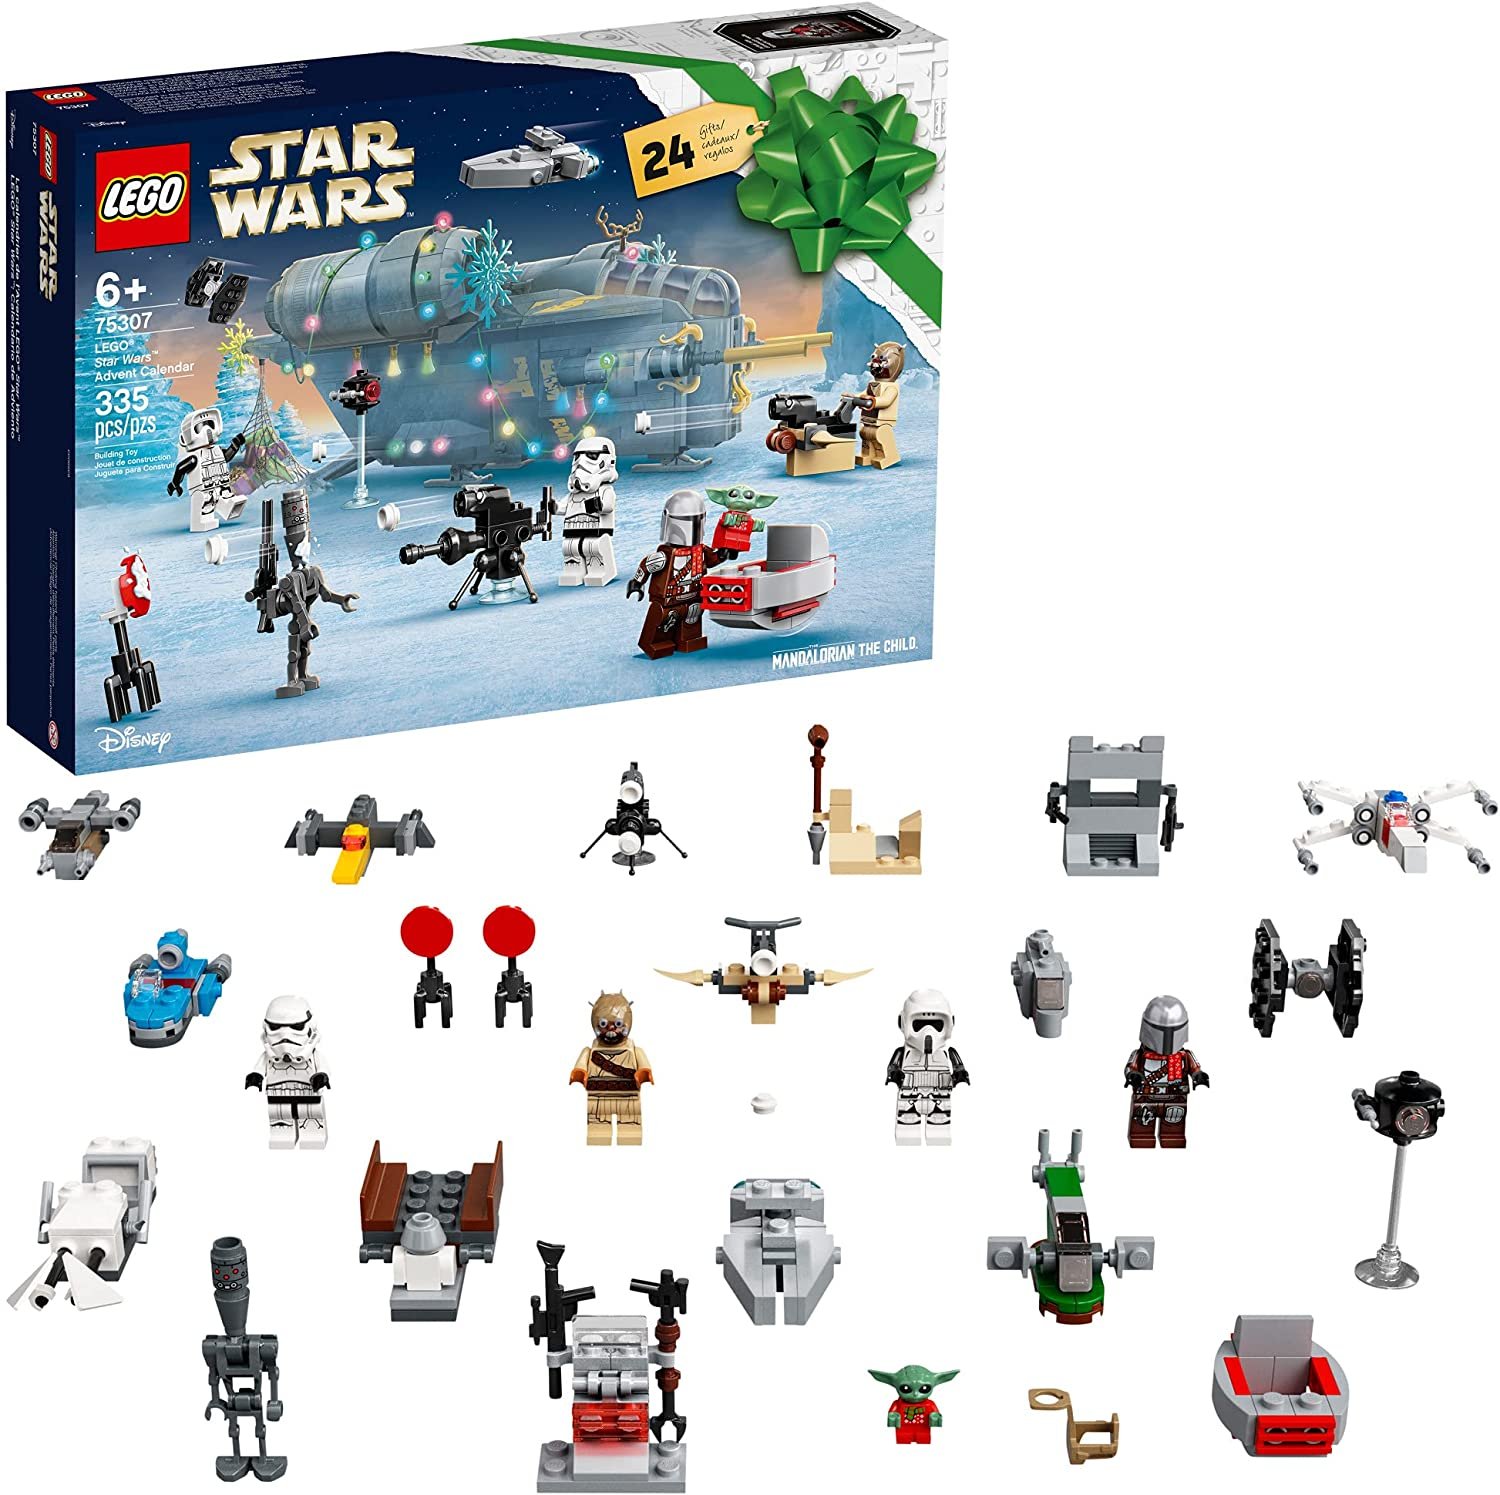 LEGO Star Wars Advent Calendar 75307 Building Toy for Kids (335 Pieces) - image 1 of 7